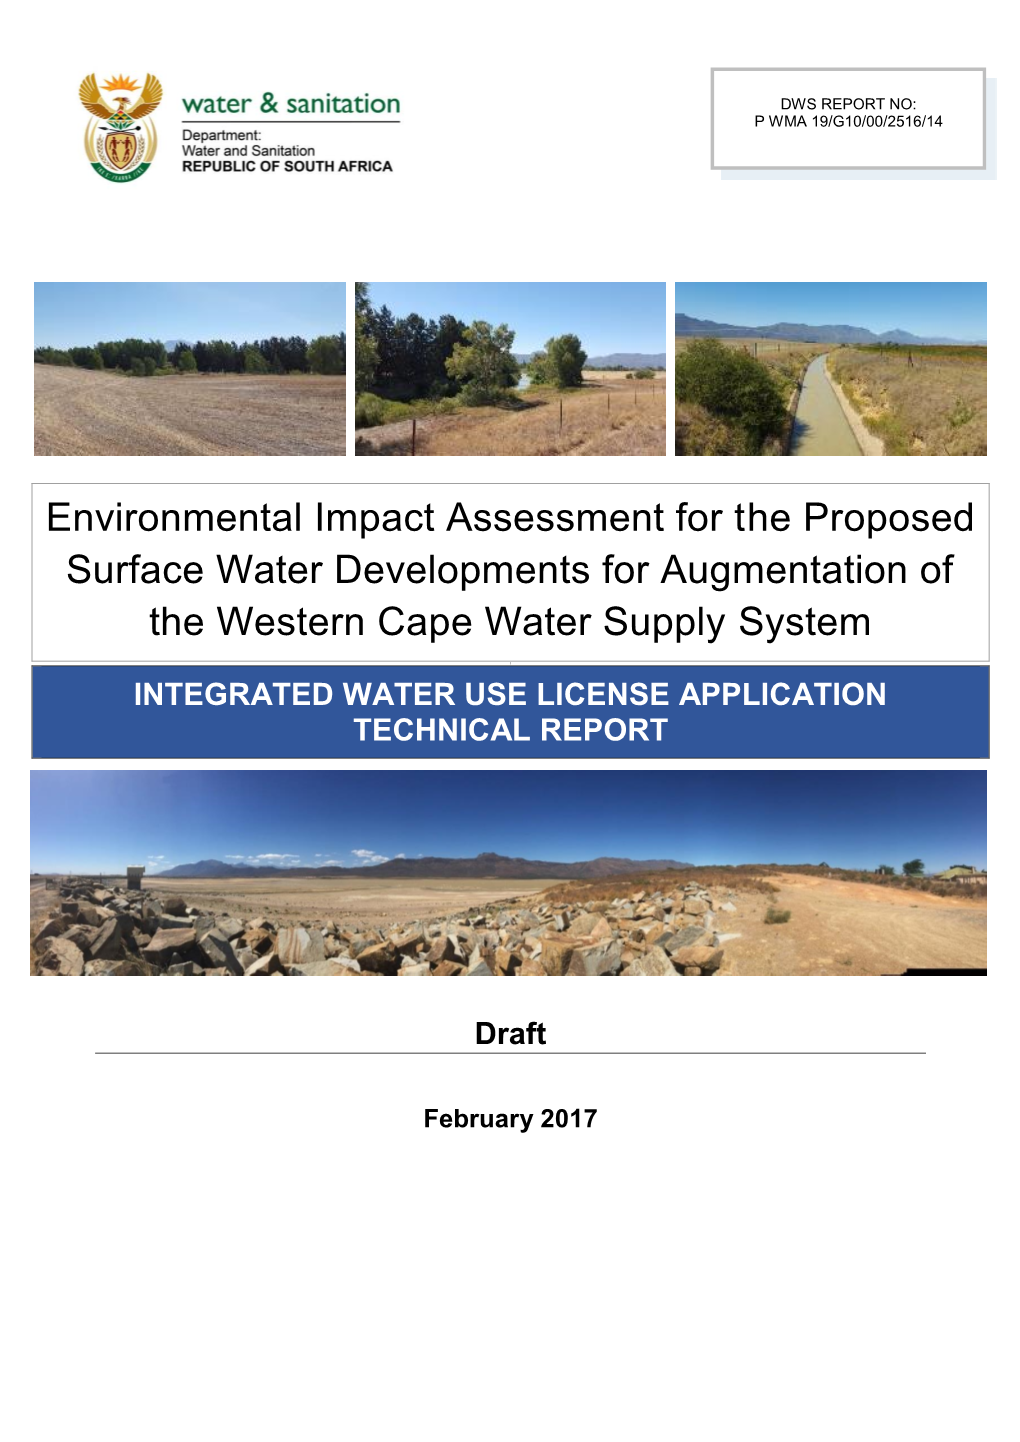 Environmental Impact Assessment for the Proposed Surface Water Developments for Augmentation of the Western Cape Water Supply System